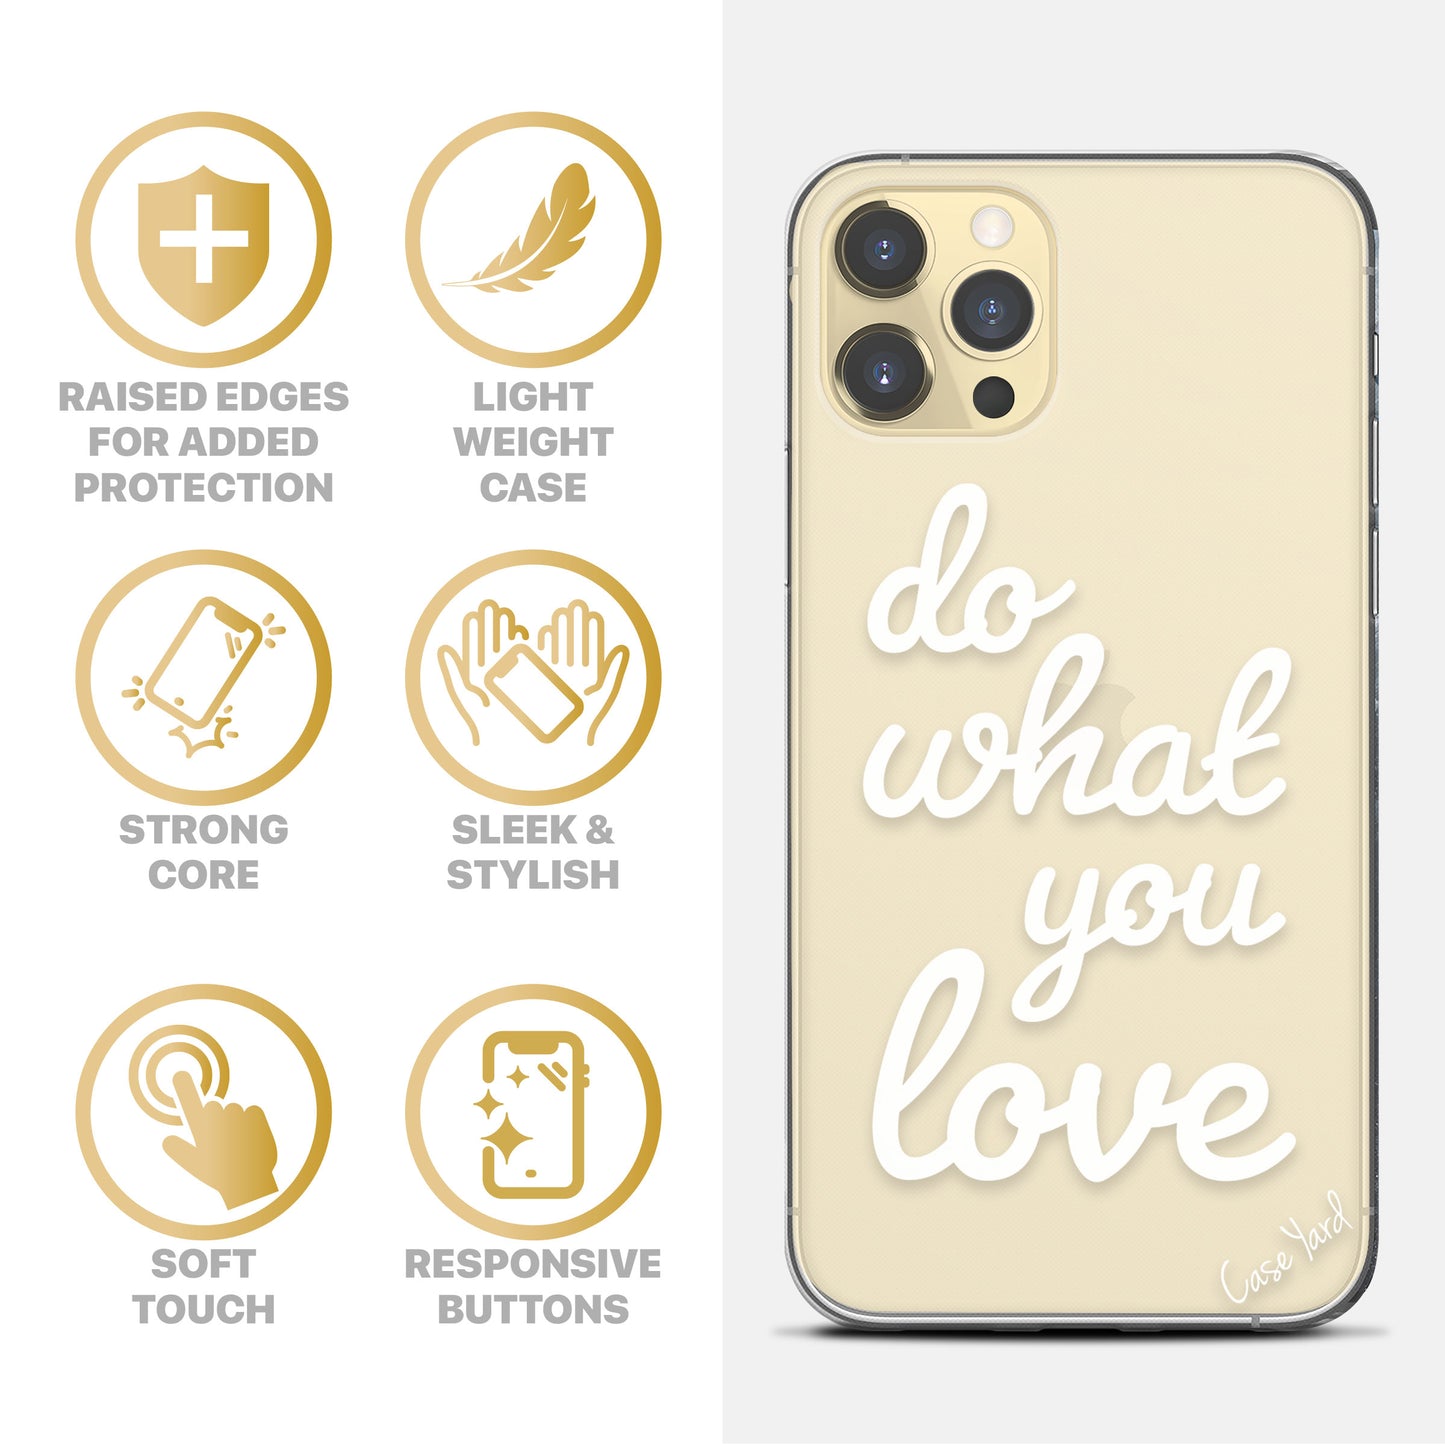 TPU Case Clear case with (Do What You Love) Design for iPhone & Samsung Phones